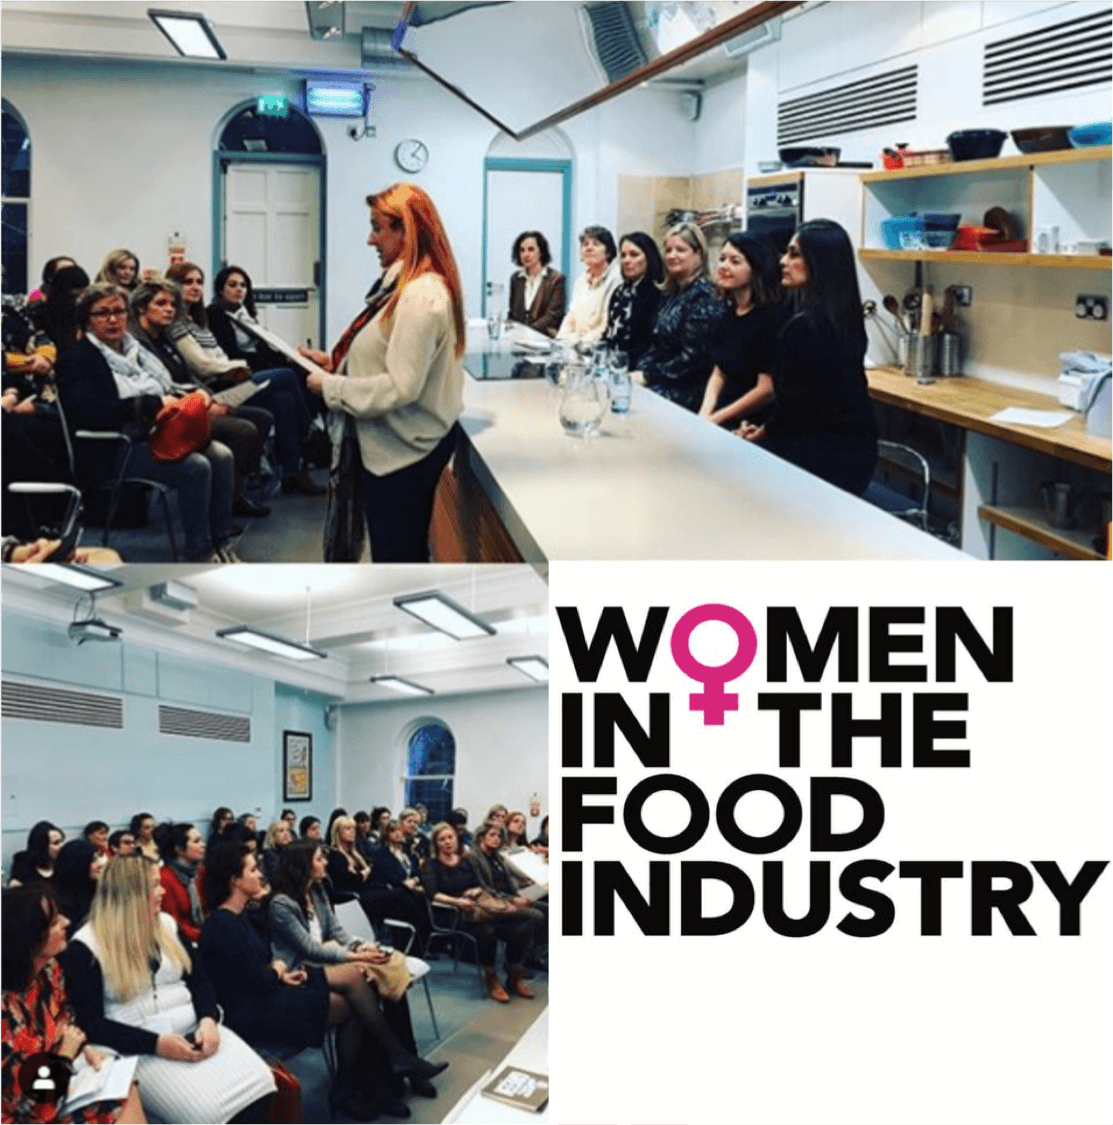 Women In the Food Industry – IWD 2019 image